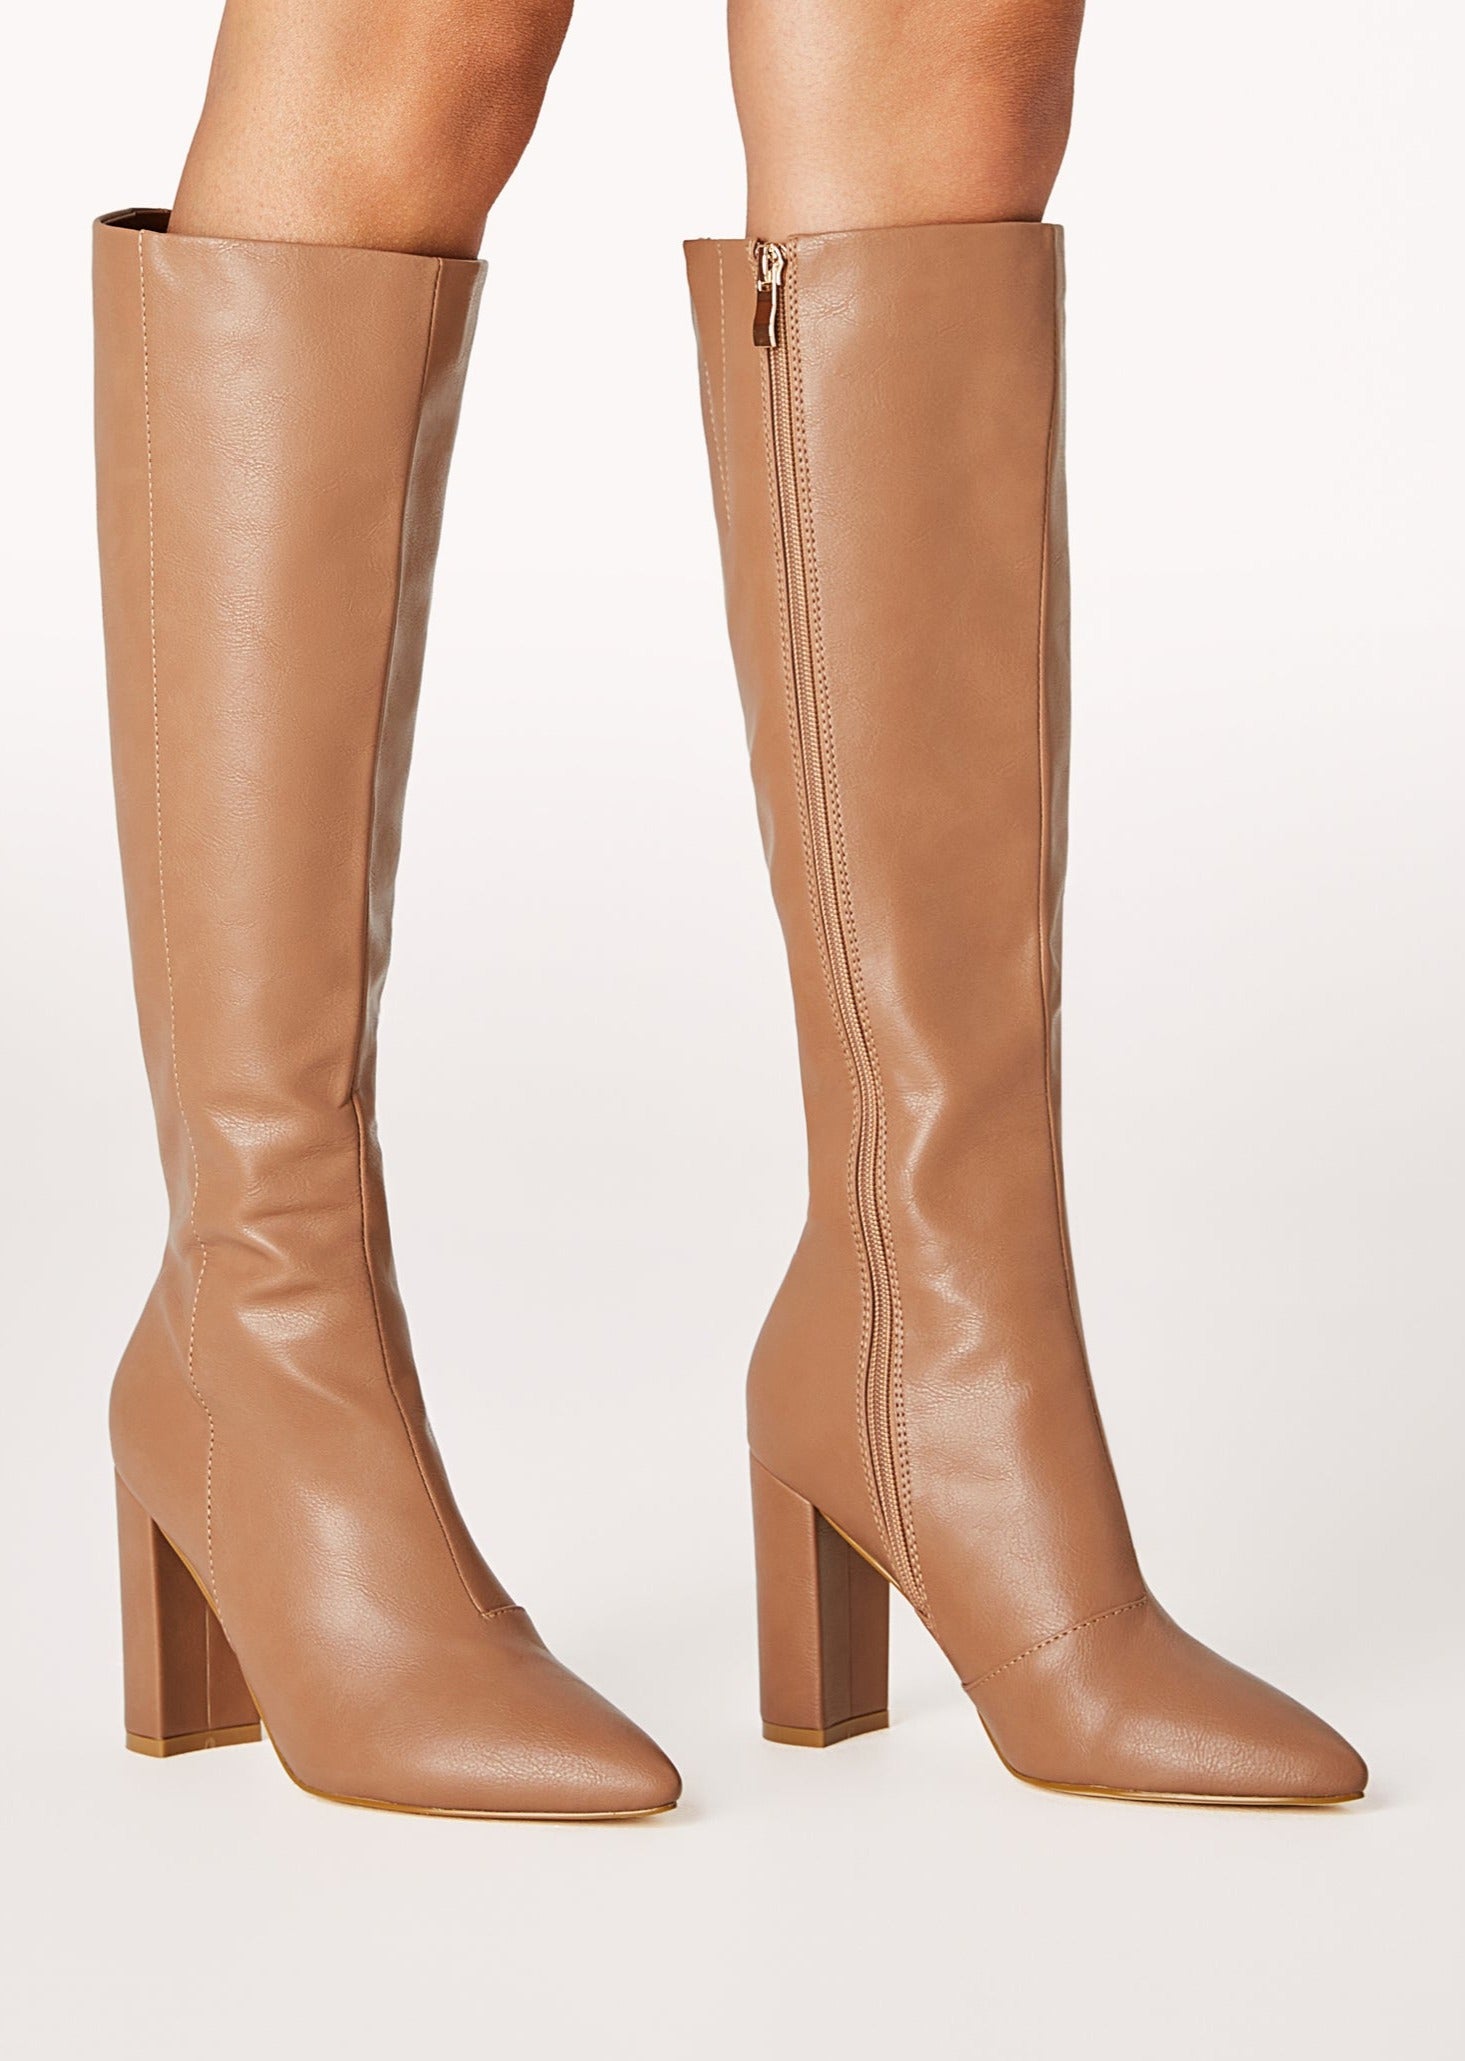 Gibson Knee High Boots - Toffee Texture